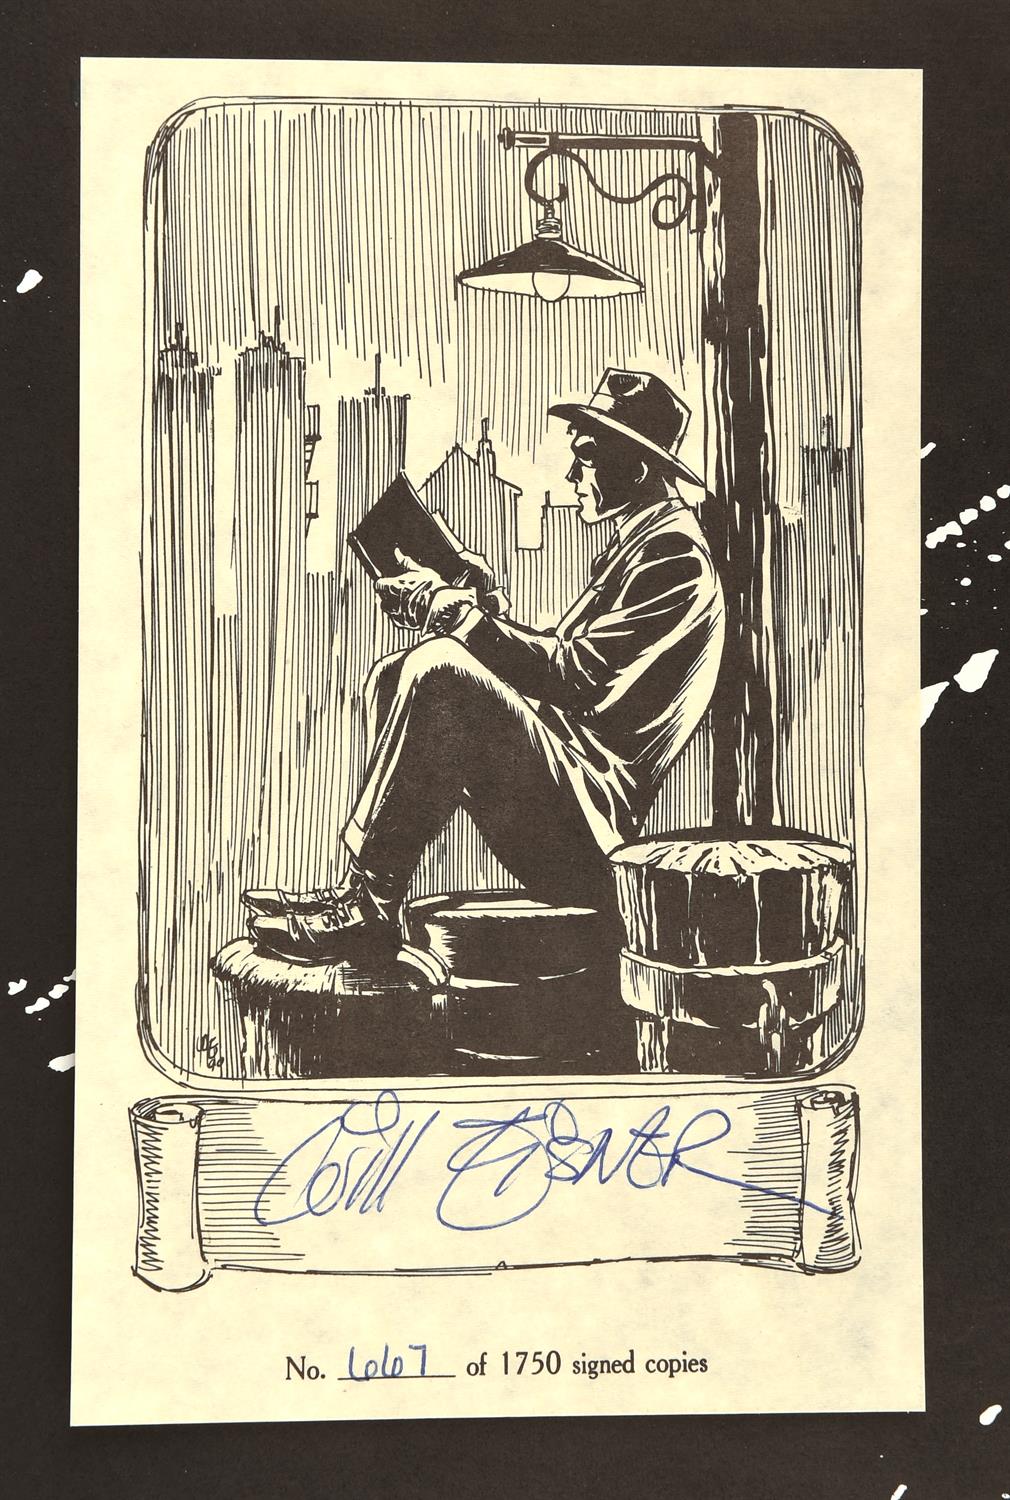 The Spirit Casebook by Will Eisner Kitchen sink Press, 1990, Signed limited Hardcover. - Image 3 of 3